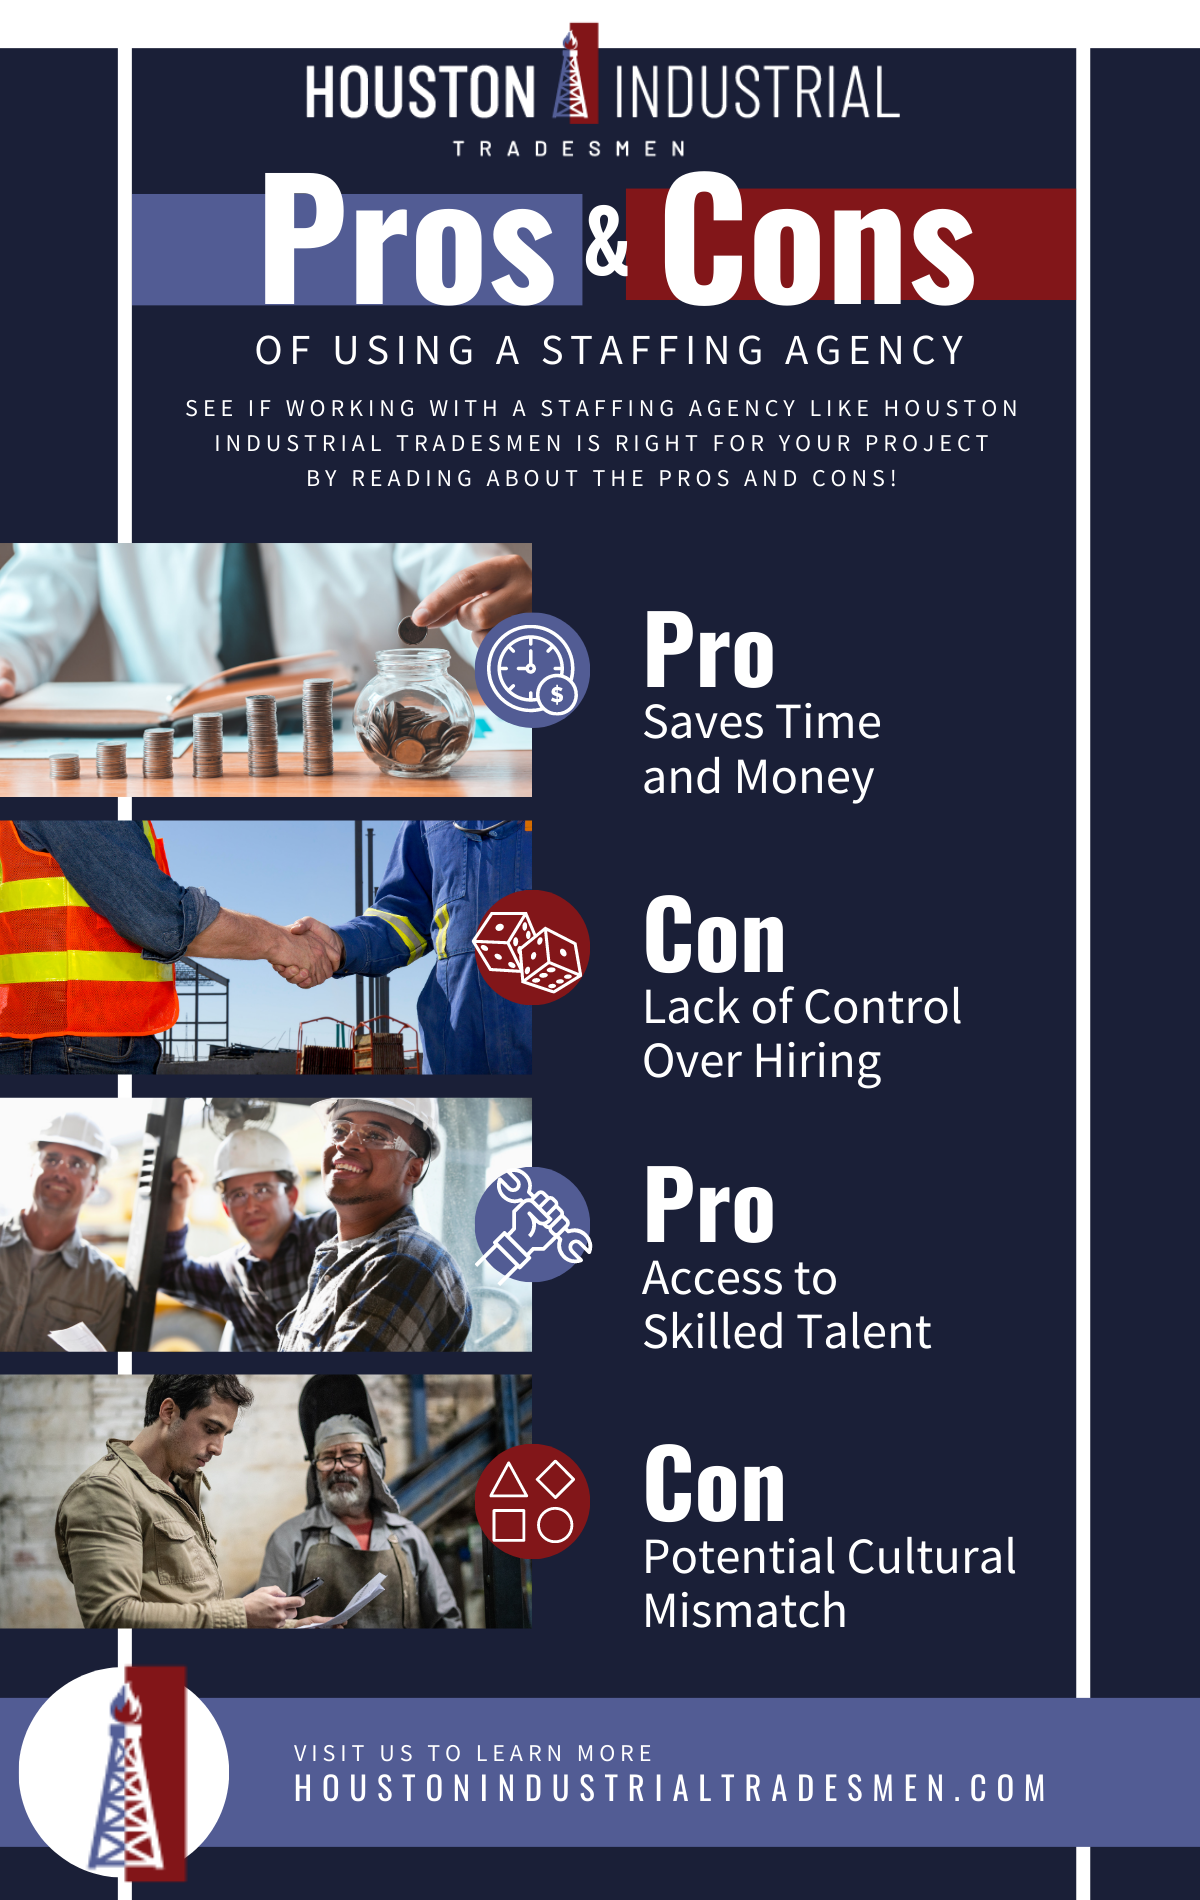 M27372 - Houston Industrial Tradesmen - Infographic - Pros and Cons of Using a Staffing Agency.png